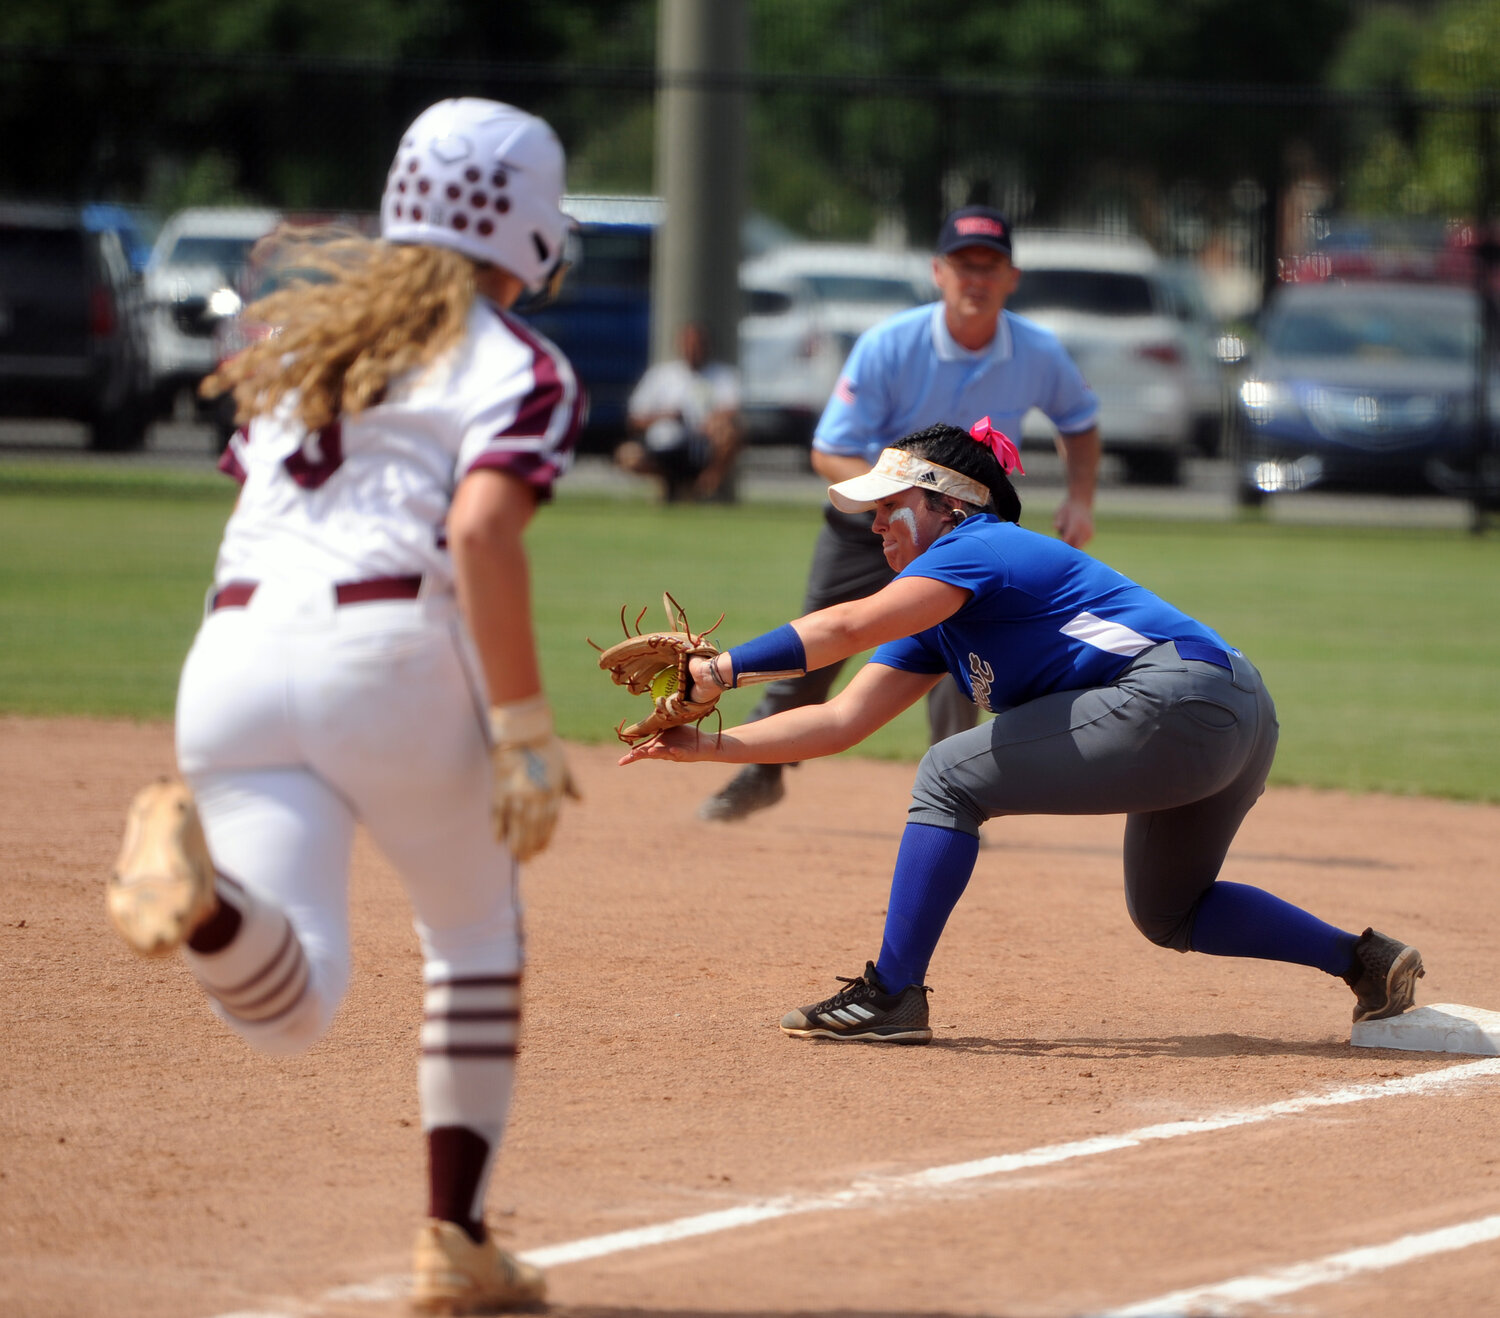 Carli Warner puts the squeeze on a throw to first for the out against Alcoa.